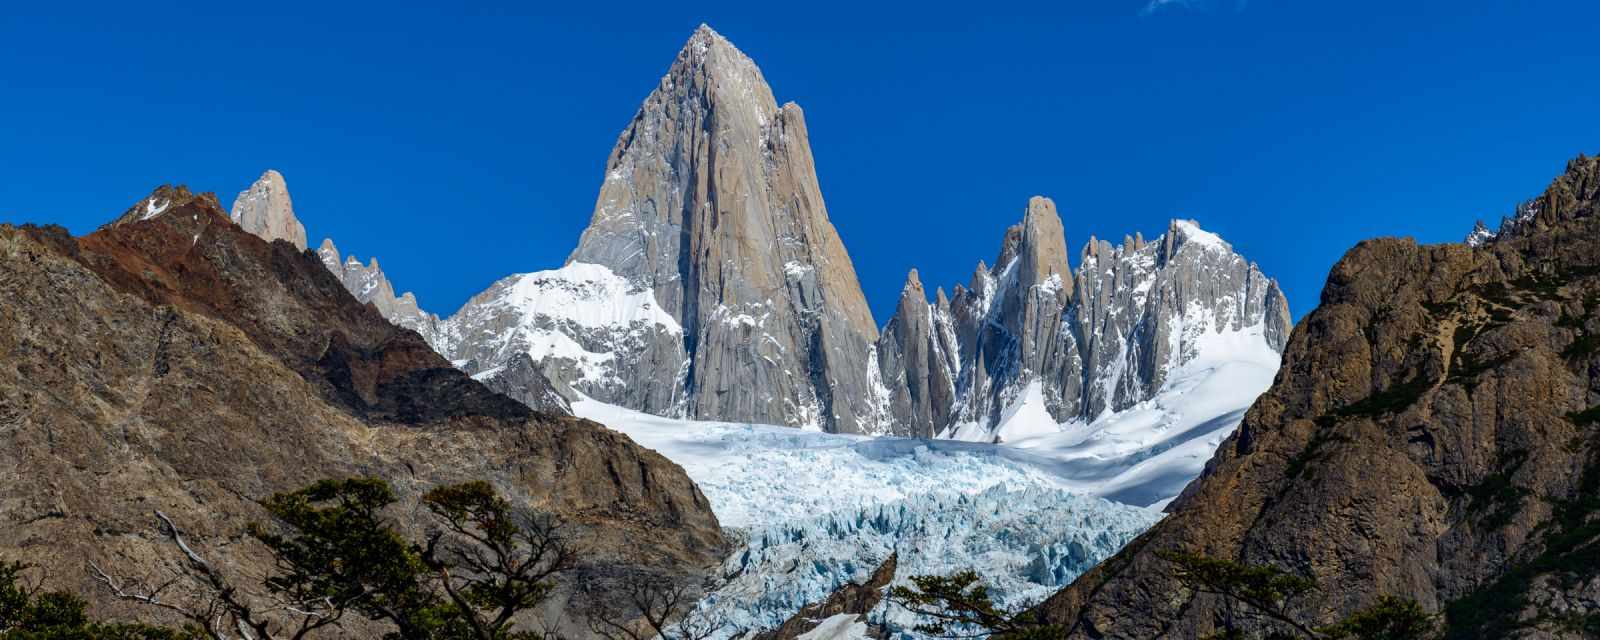 Mount Fitz Roy - El Chaltén Hike in Patagonia and 7 Tips